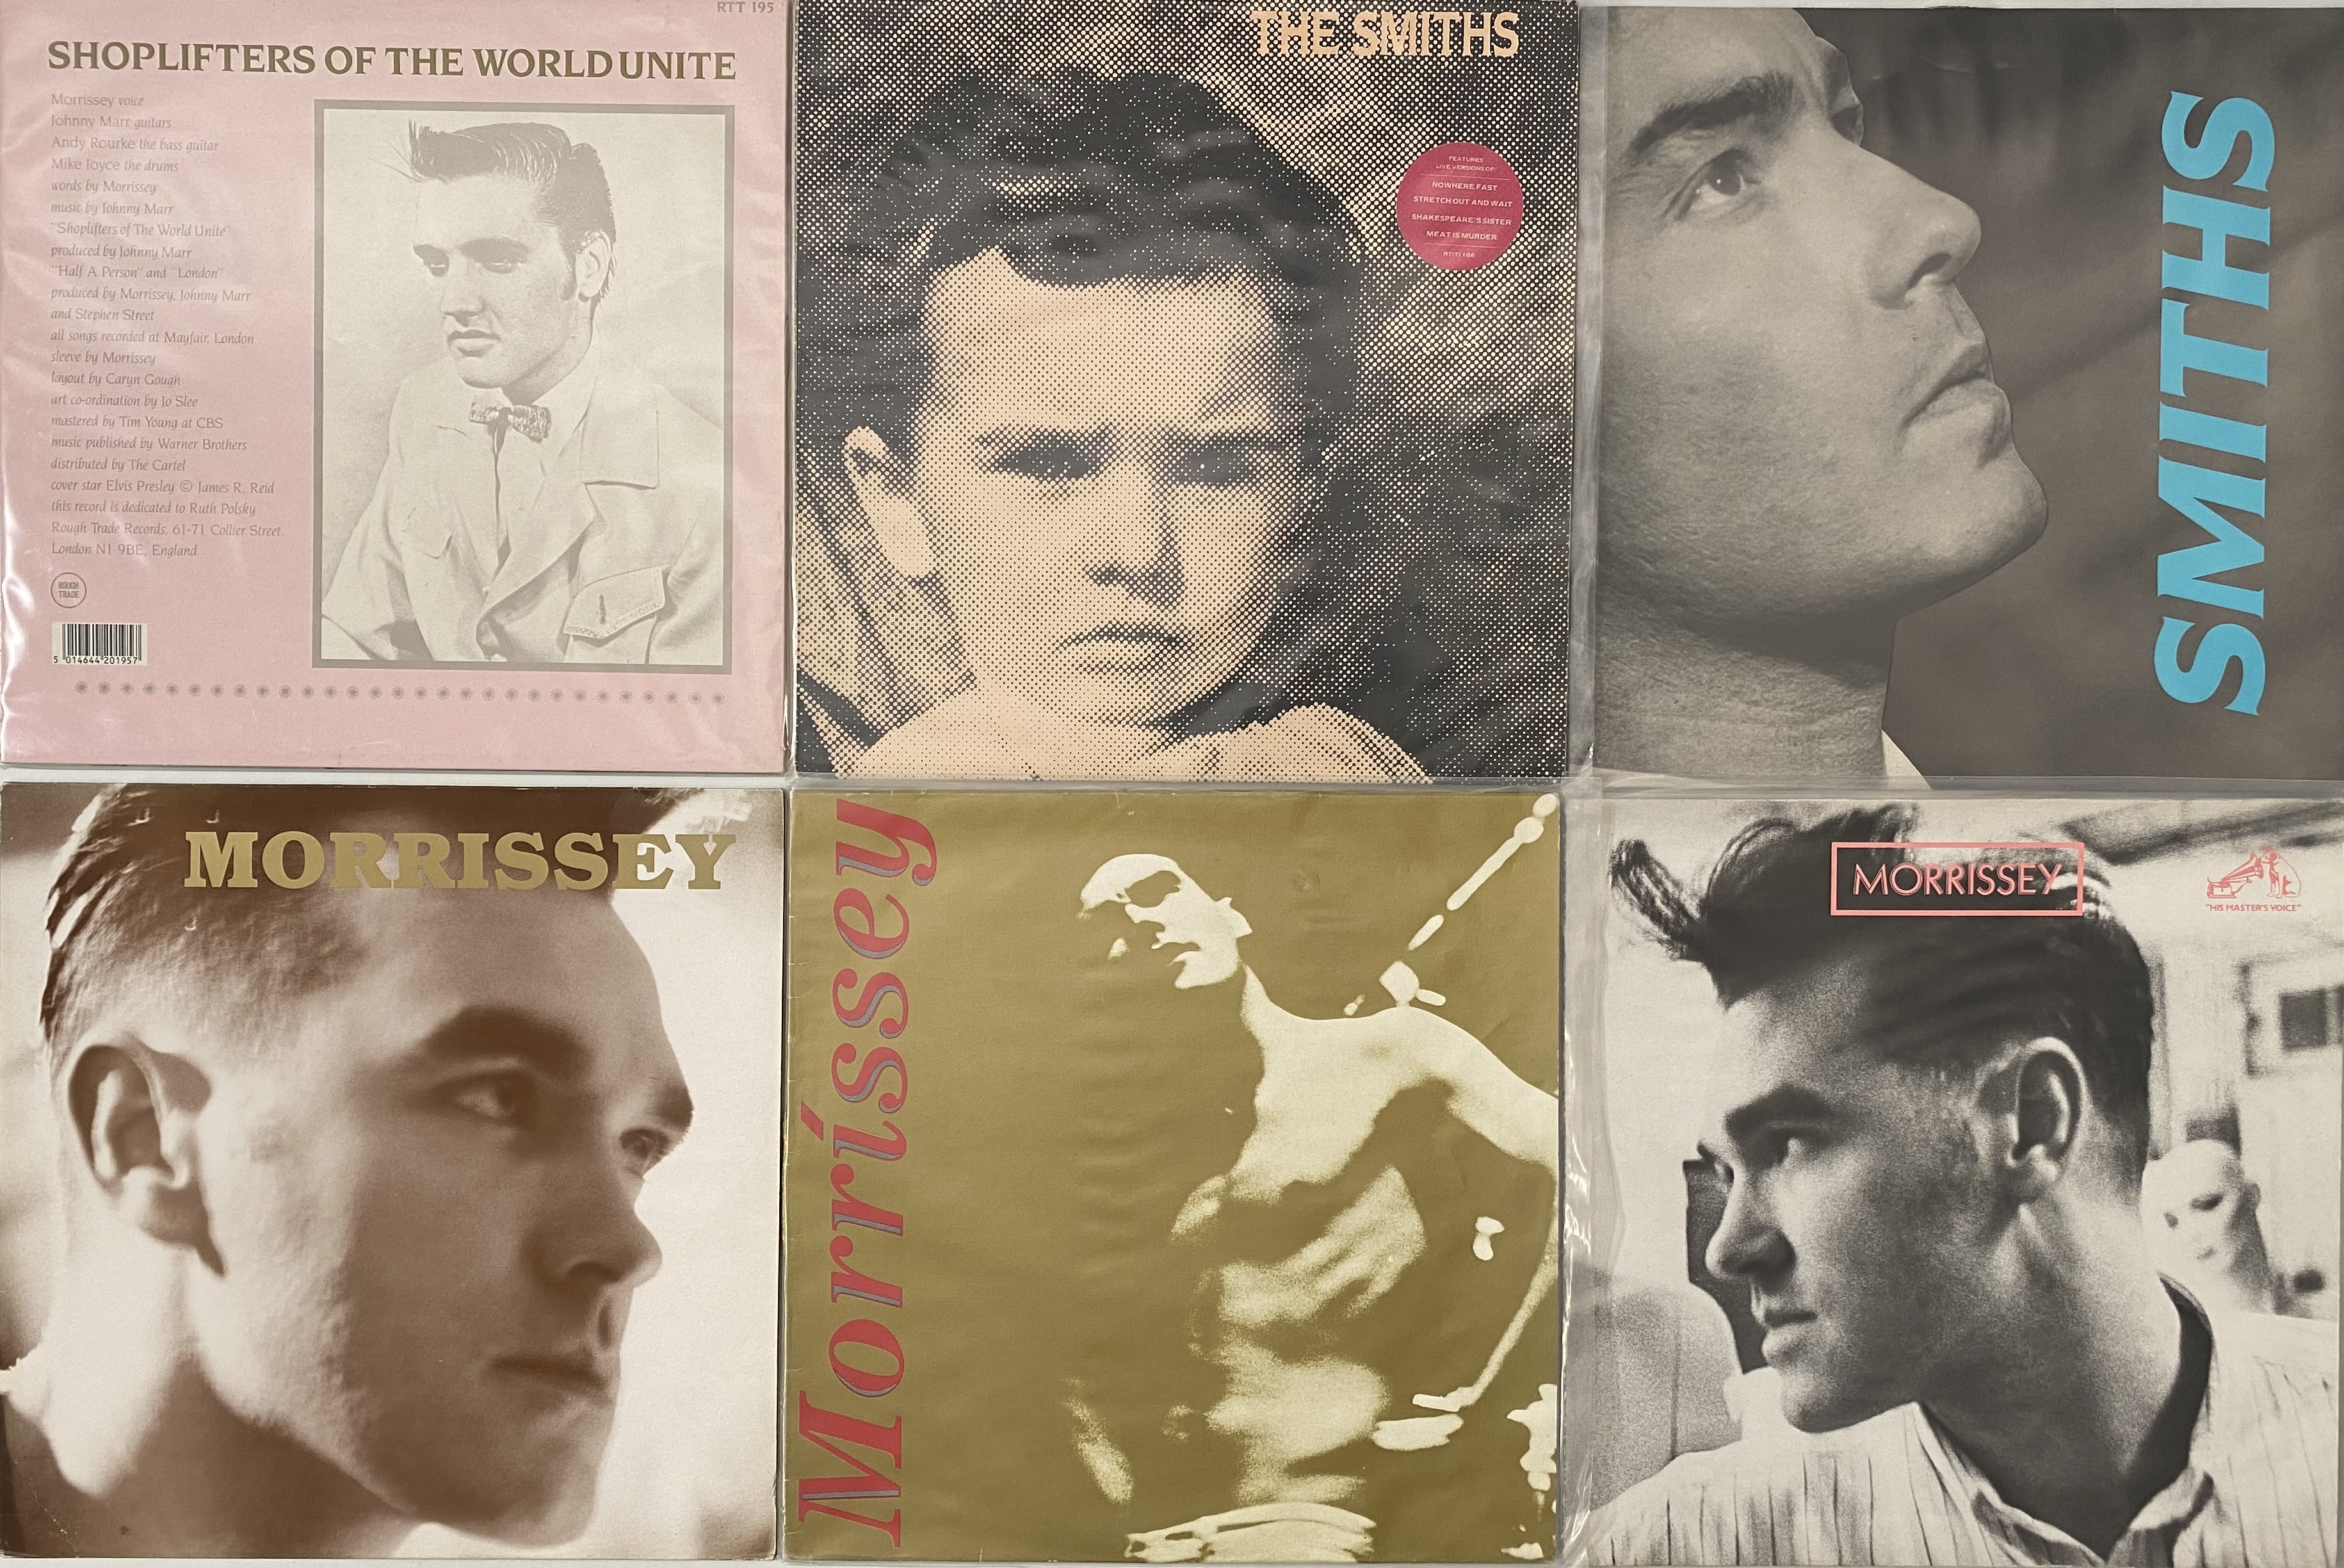 47 - THE SMITHS/ MORRISSEY LP/ 12"